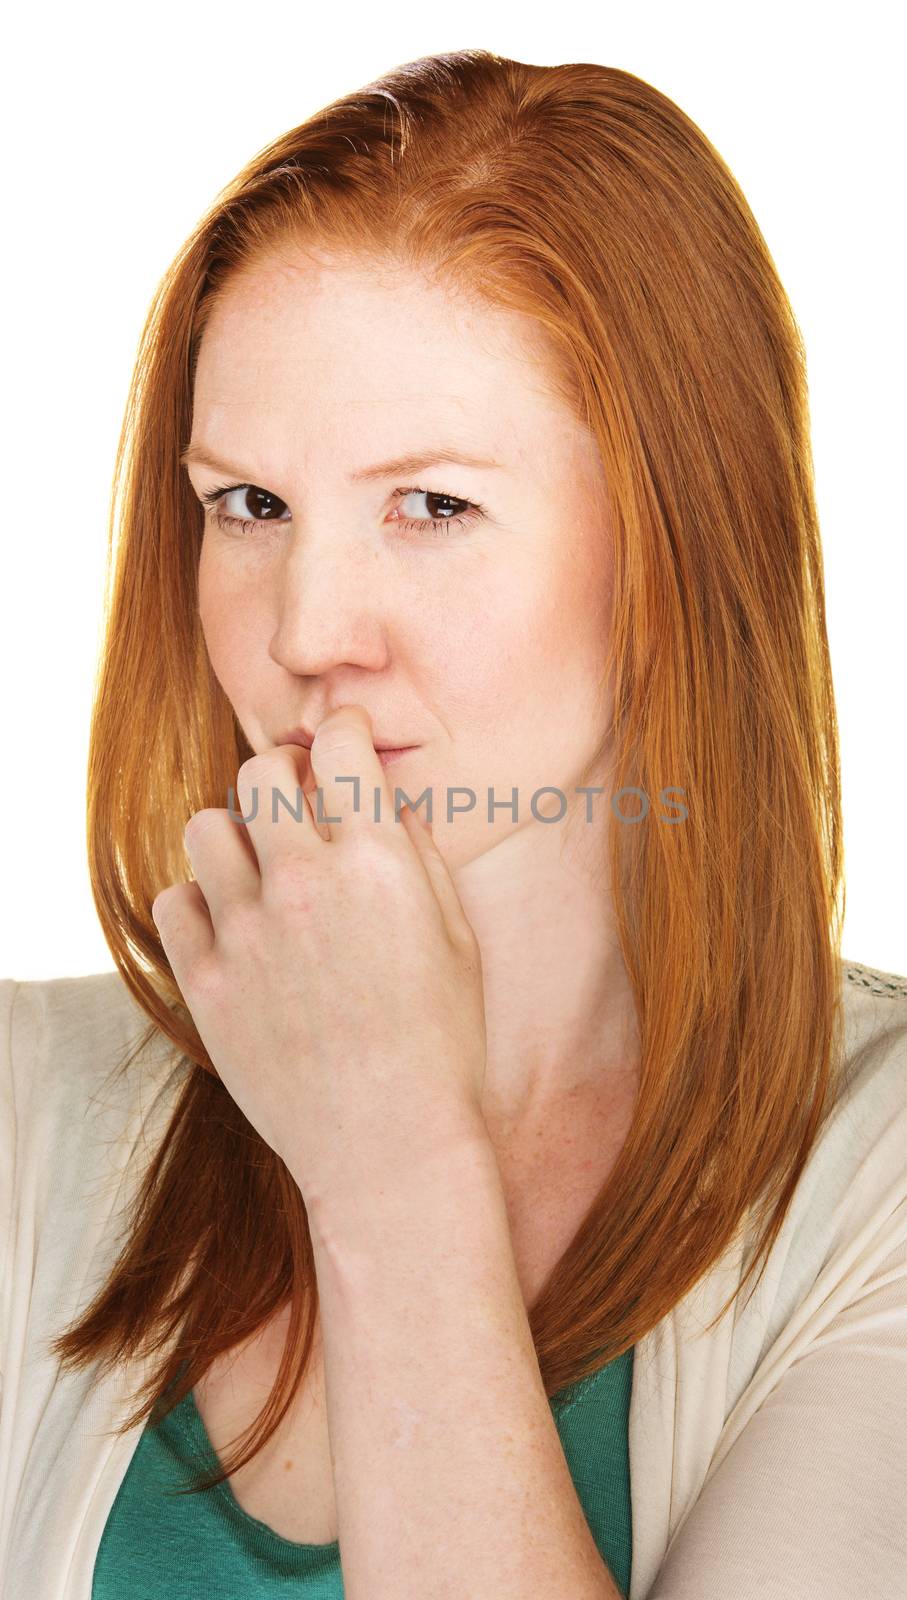 Thinking red haired woman with a devious expression